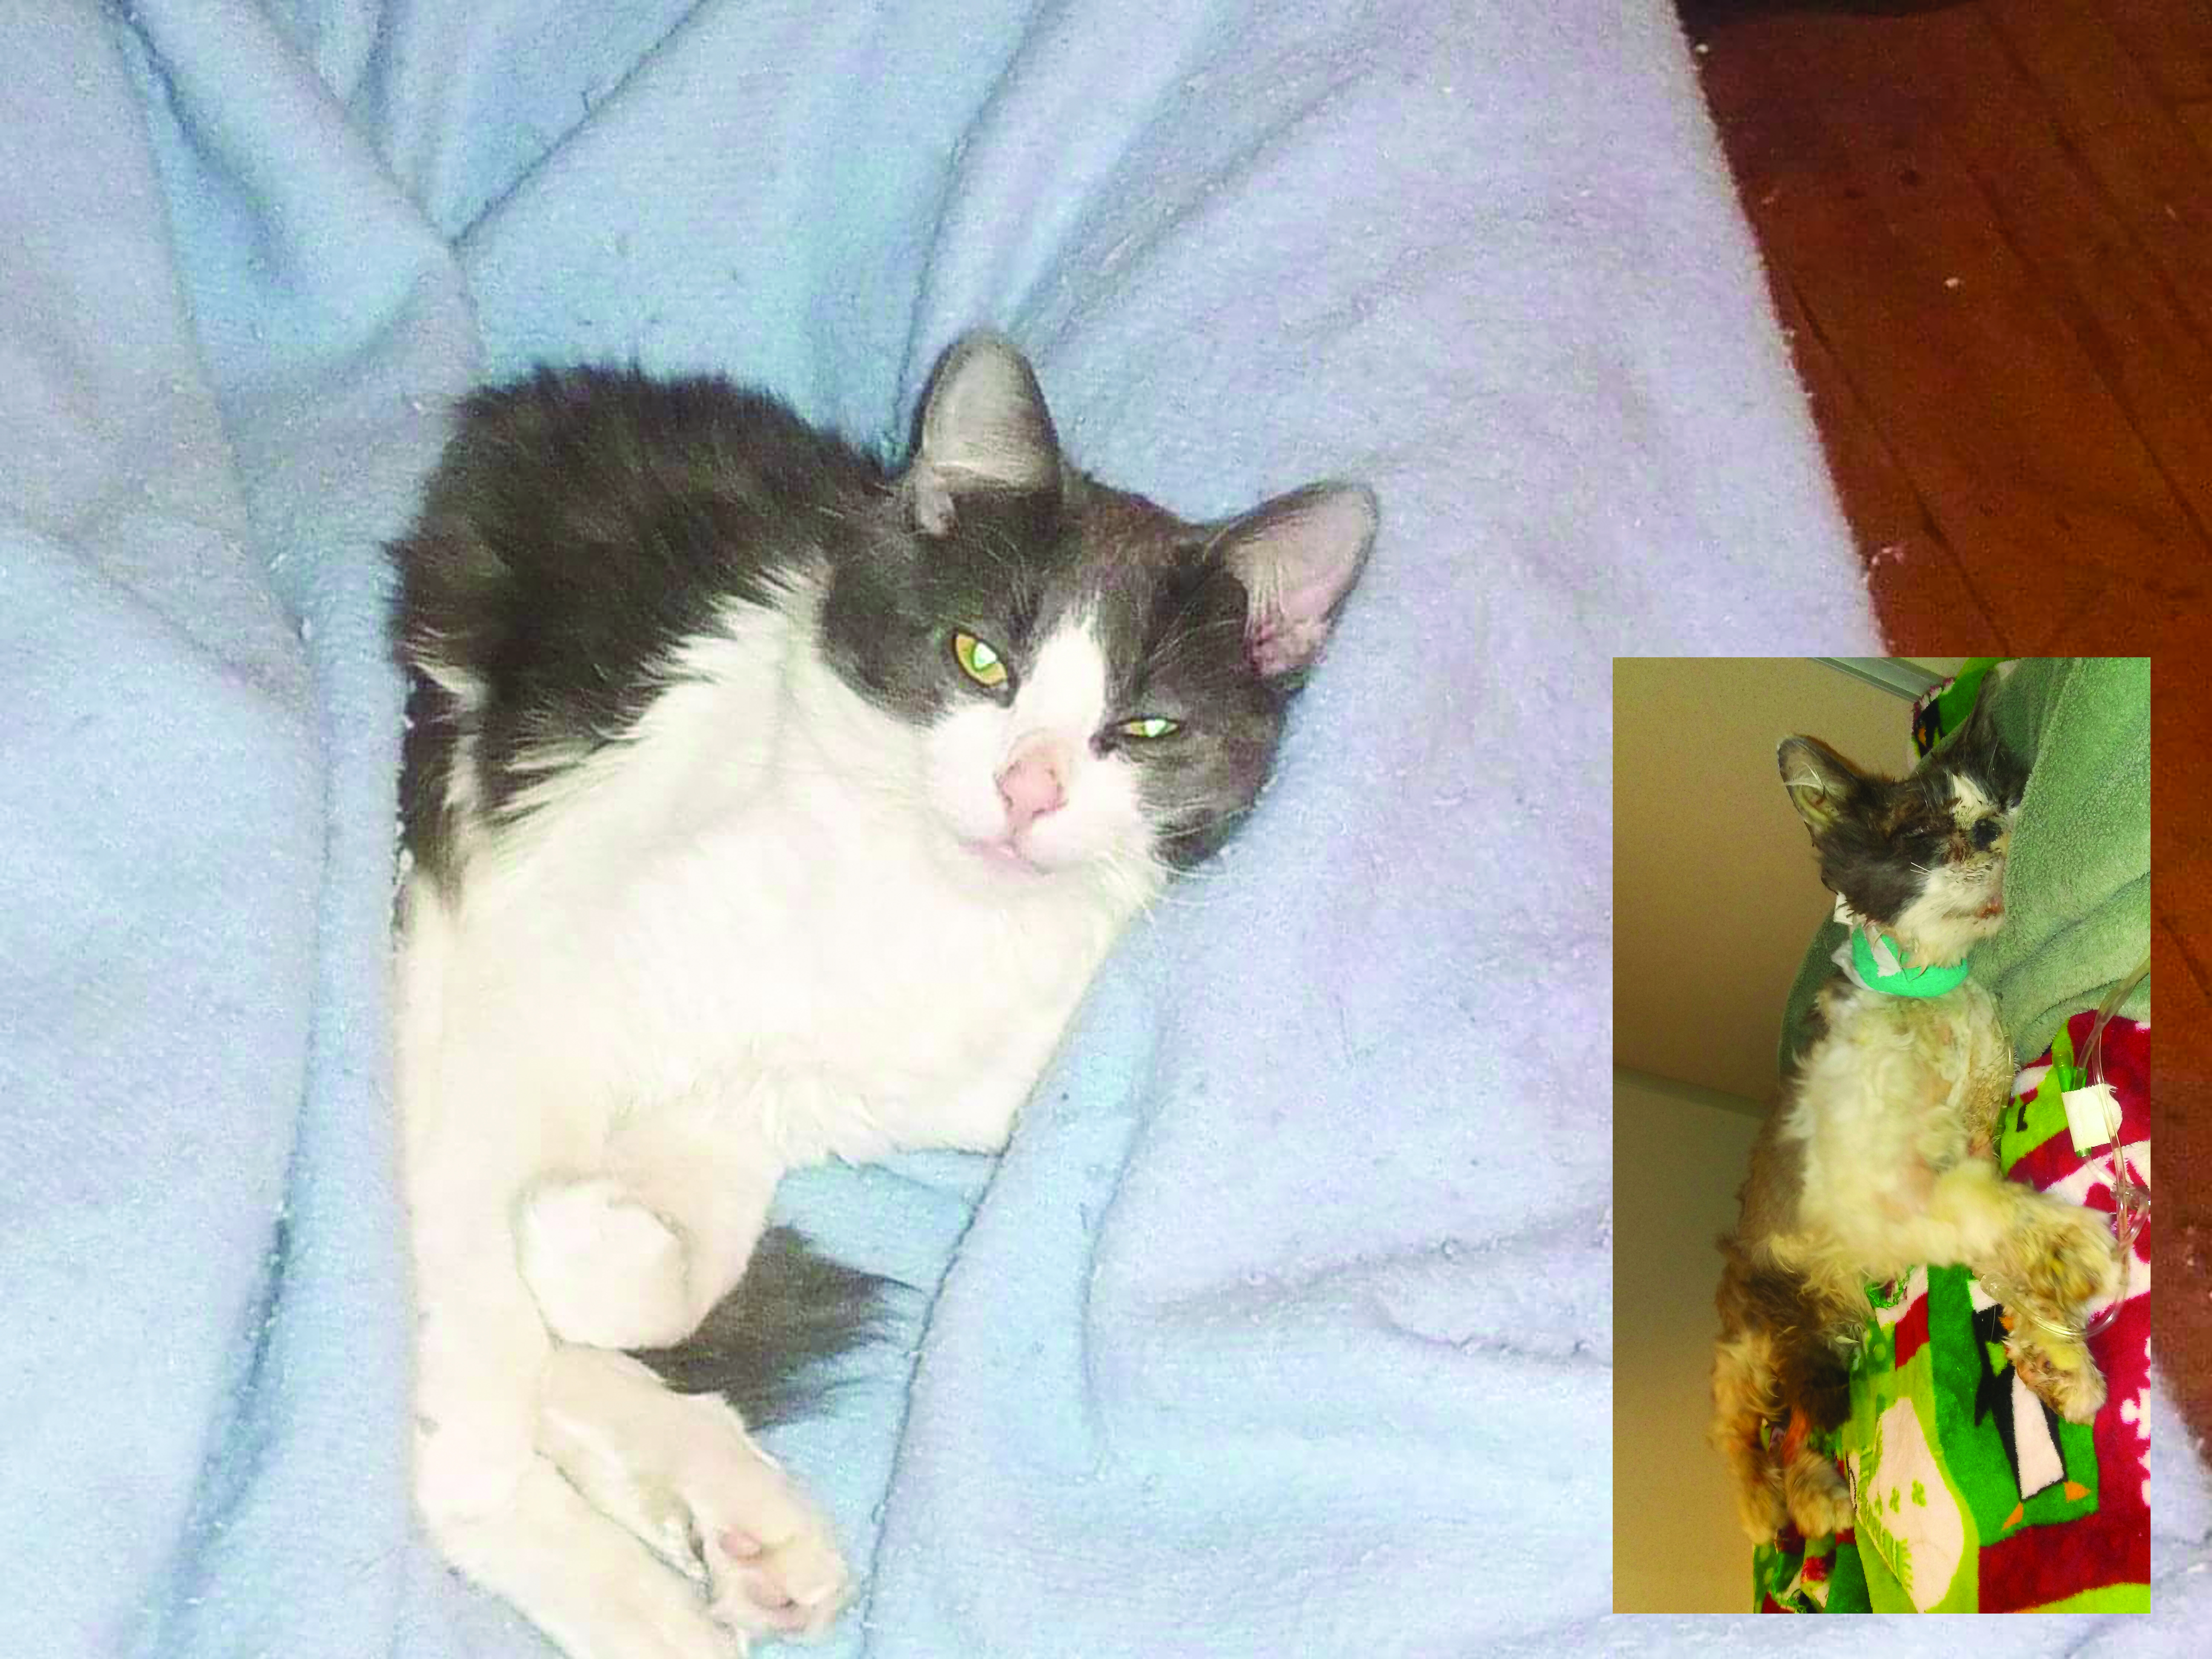 Cat Tortured With Hot Glue in Utah Abuse Case | Time